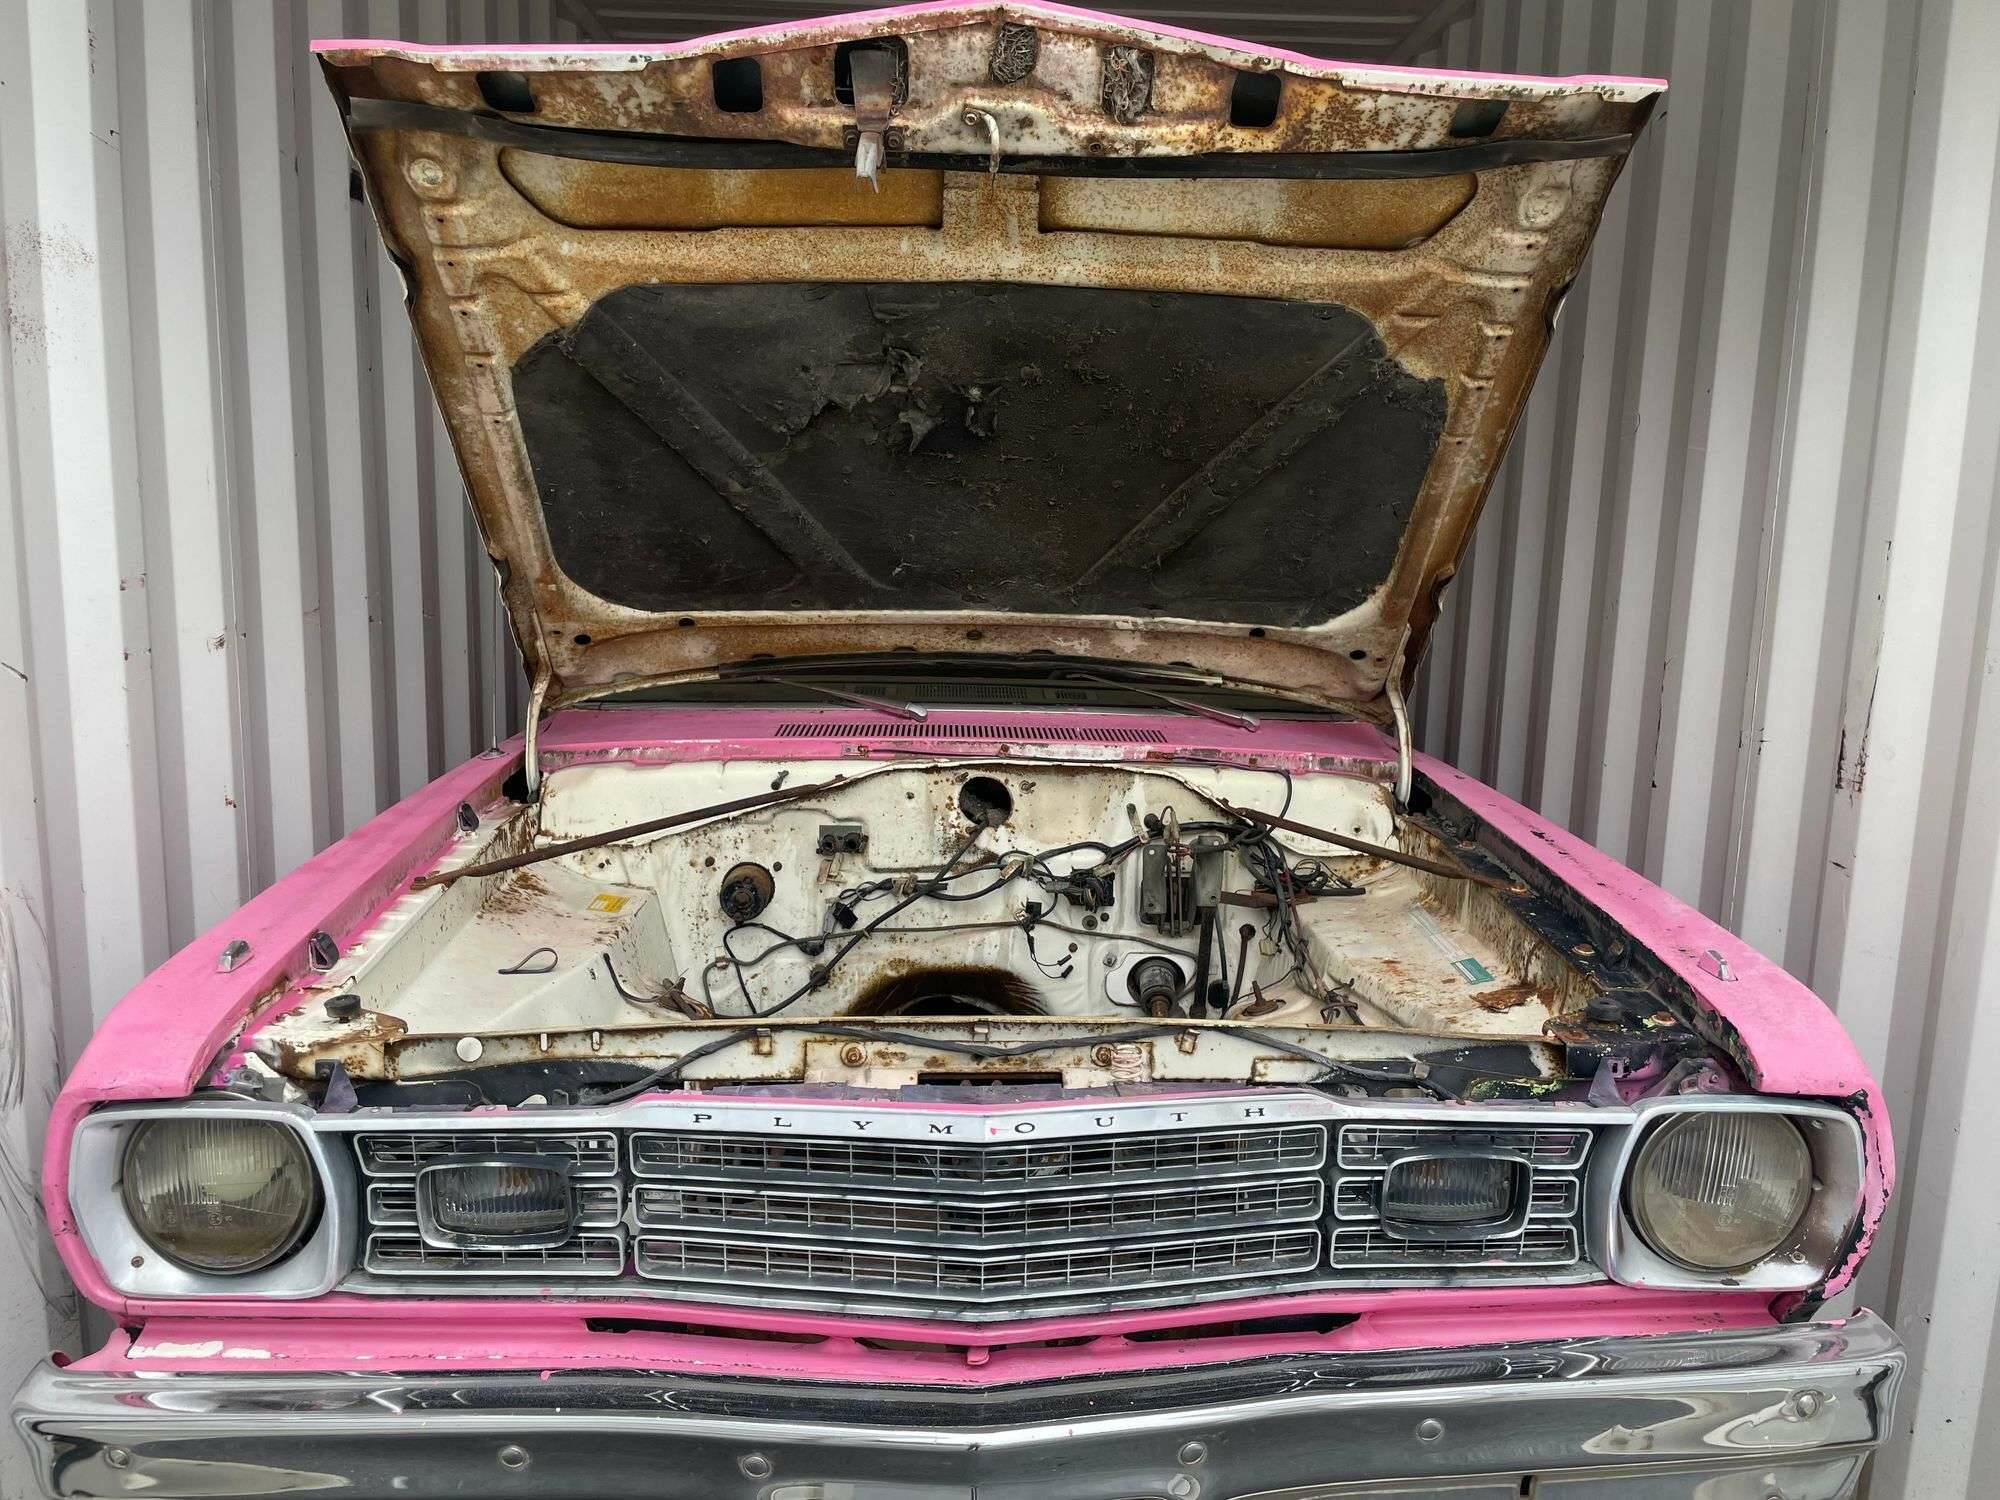 Chilliwack’s iconic pink car is being auctioned off by Beekman Auctions for the Salvation Army. (Beekman Auctions)